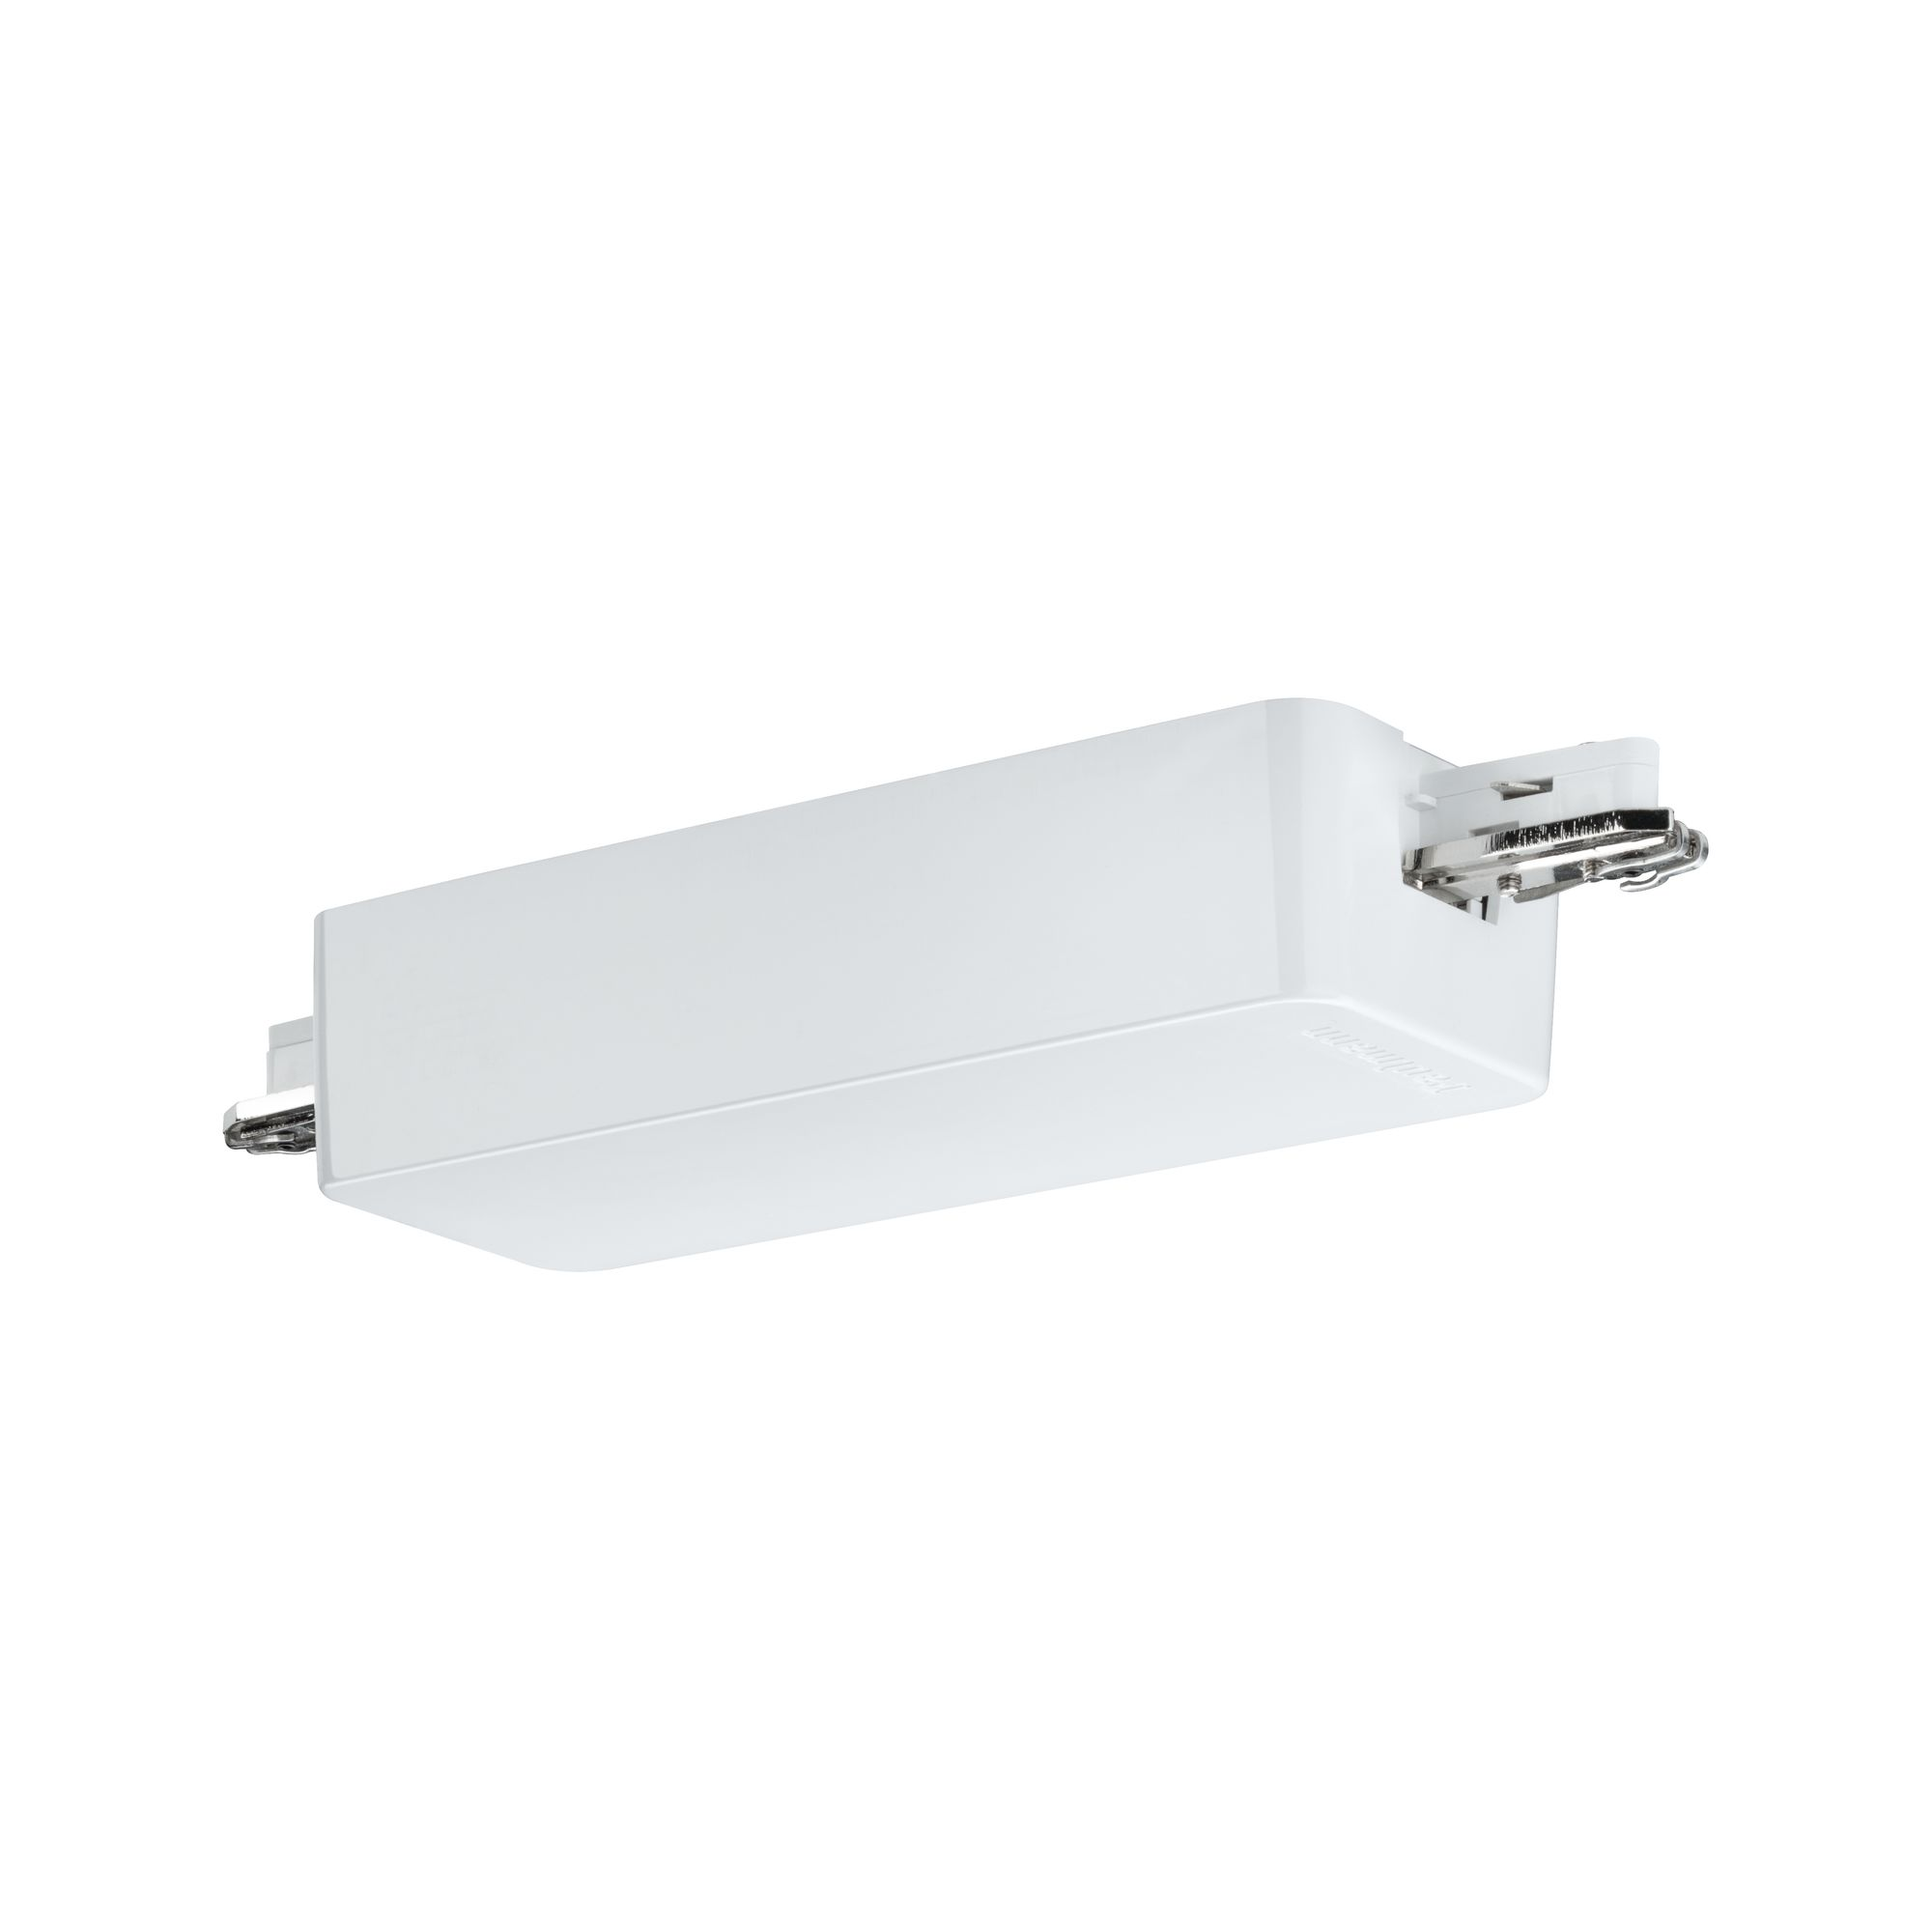 Dimm/Switch Adapter SmartHome ZB Urail System max. 400 W 230 V weiß + product picture